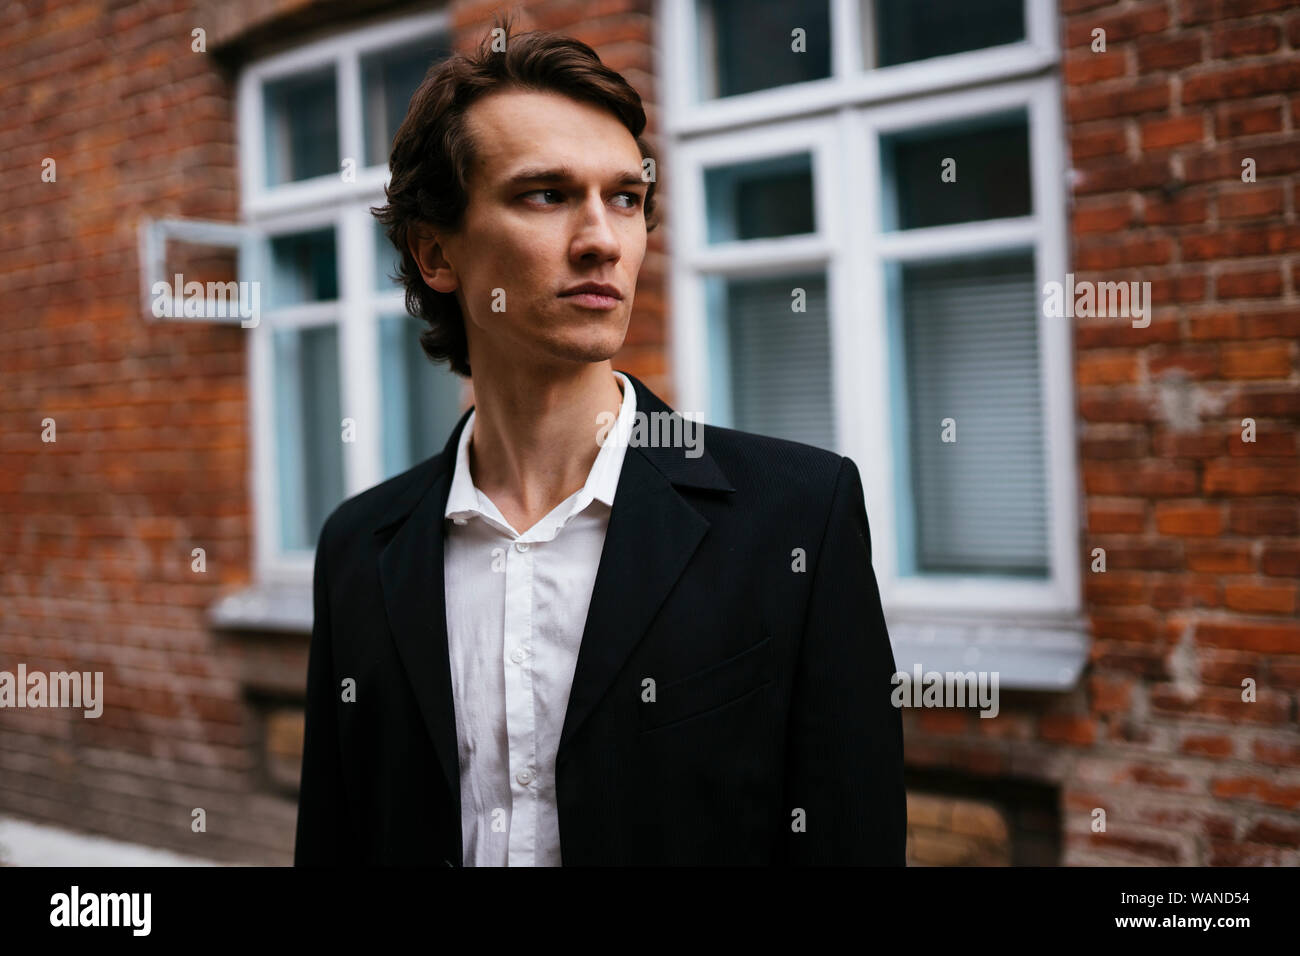 man in a business suit looks away Stock Photo